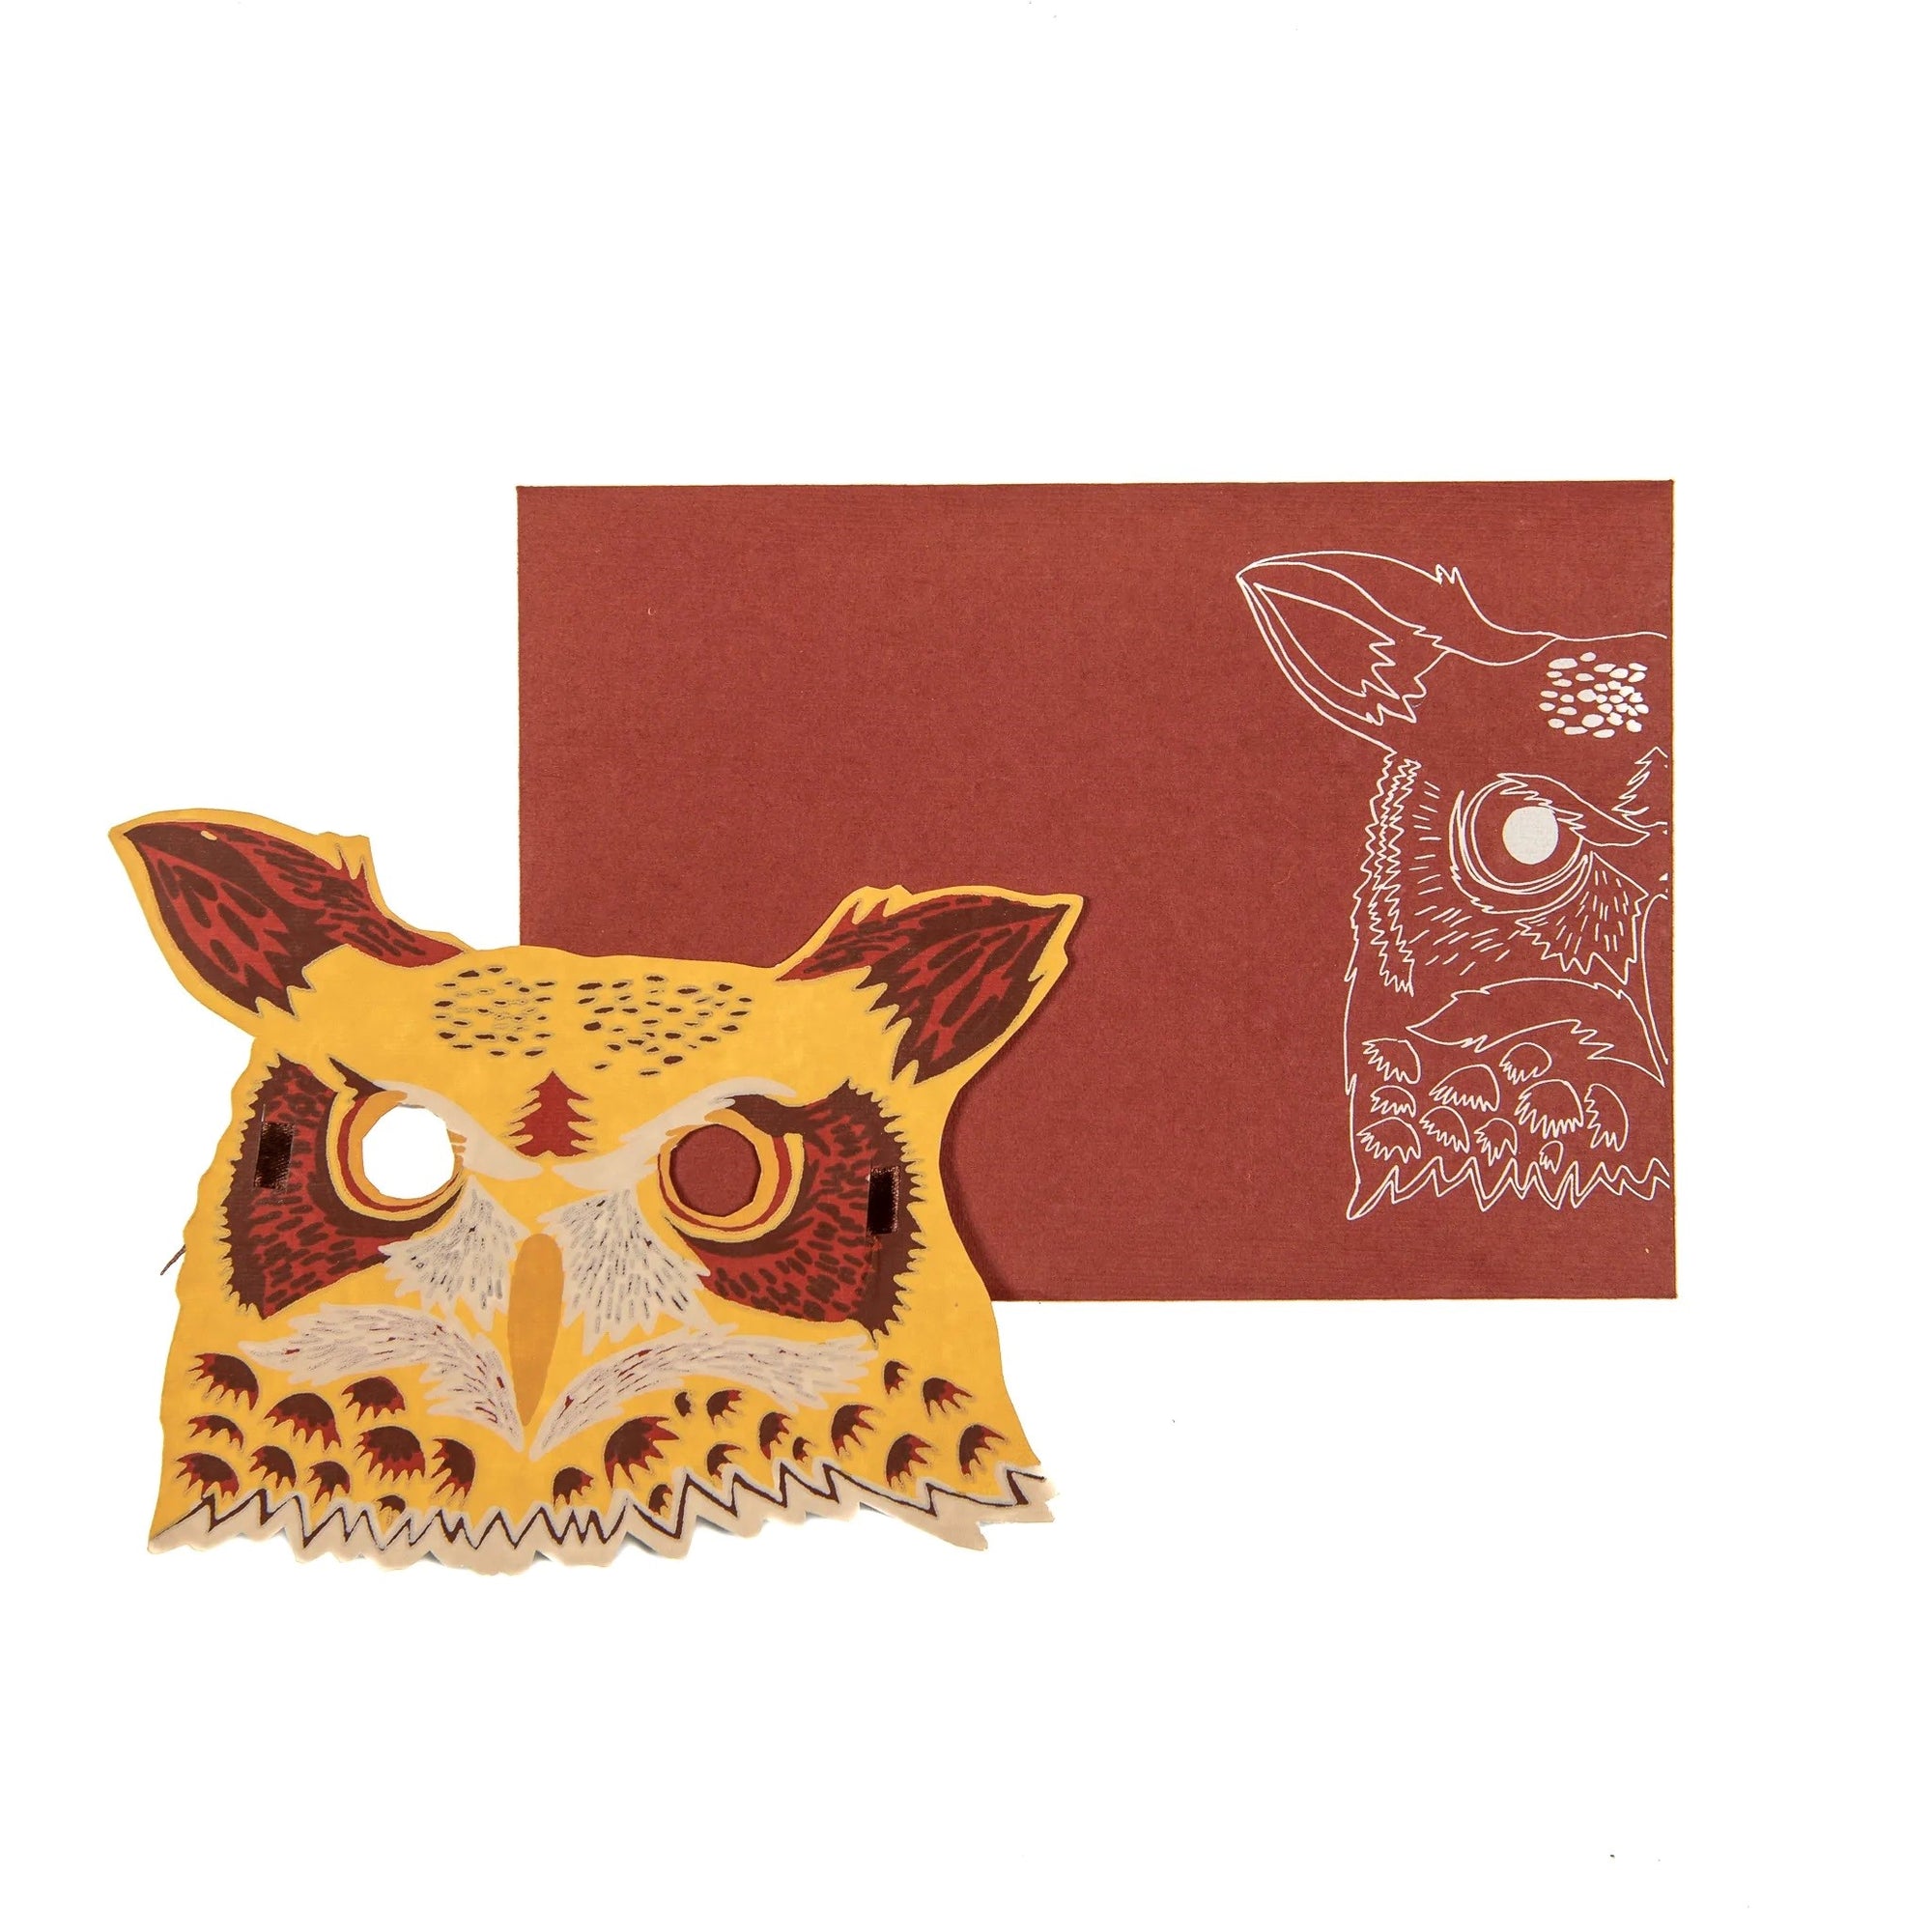 East End Press Owl Mask Greeting Card